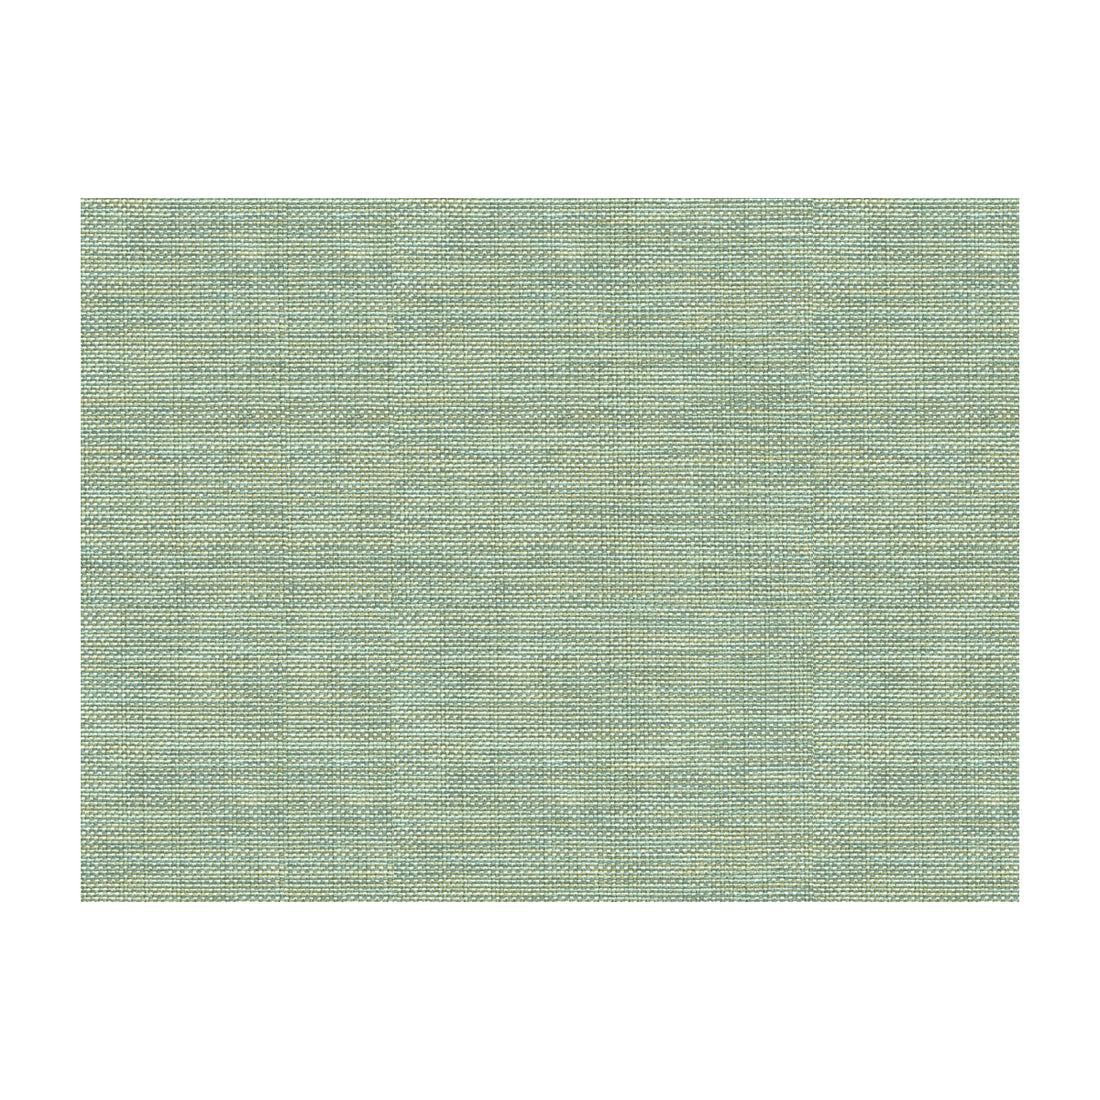 Sequoia fabric in spa color - pattern 34174.13.0 - by Kravet Design in the Candice Olson collection